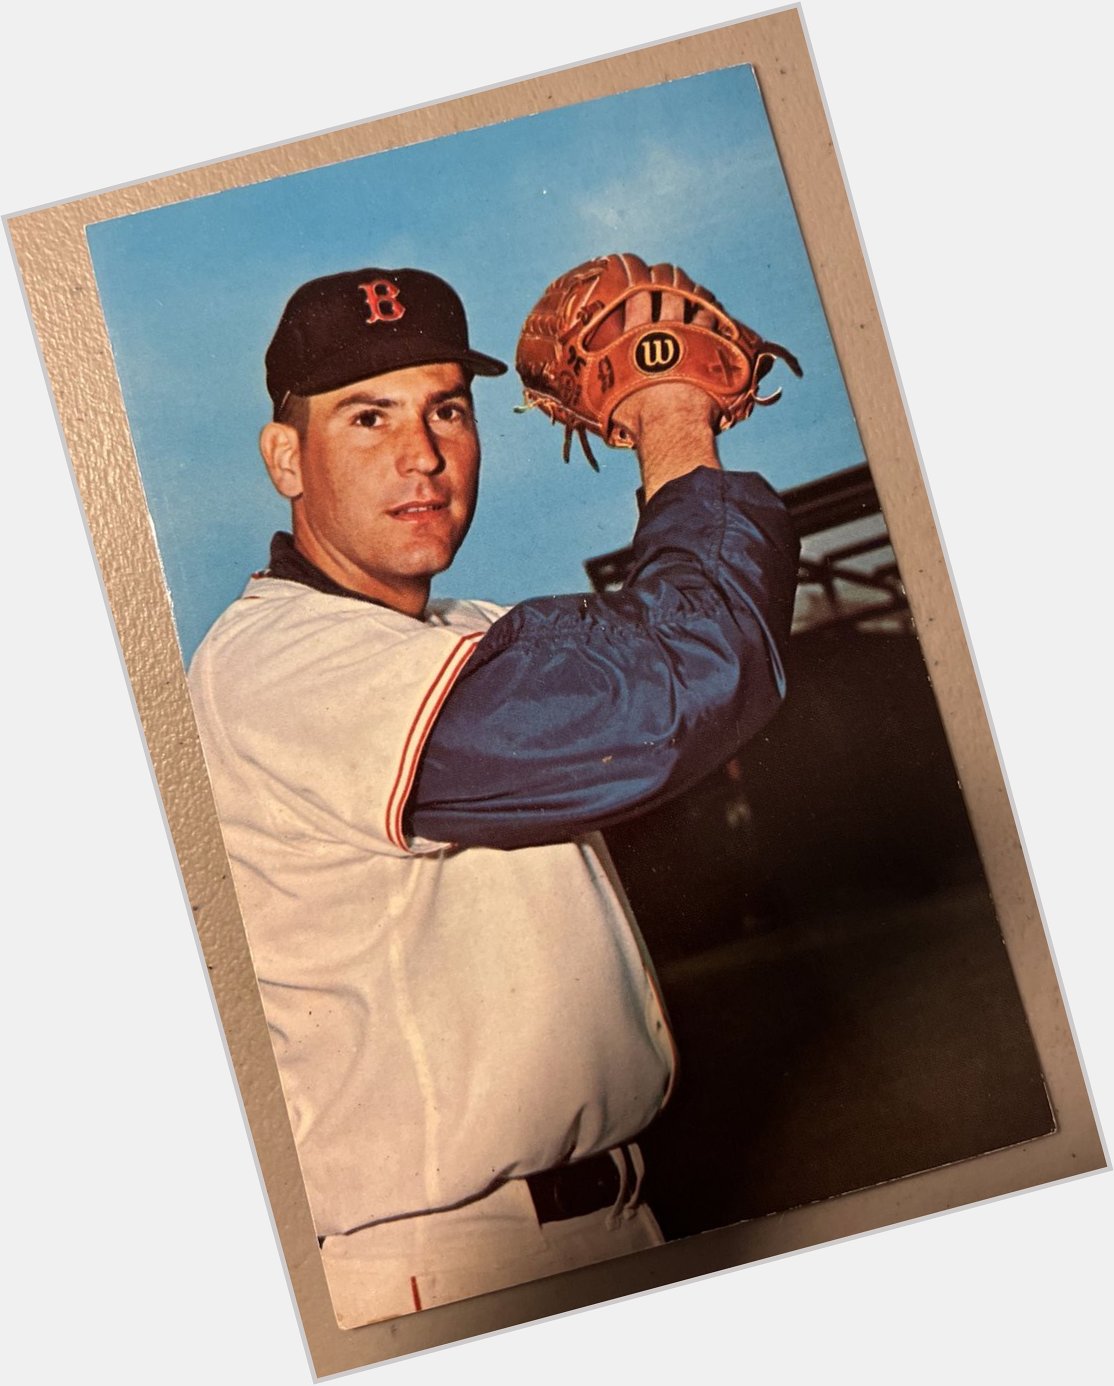 Happy birthday to former Red Sox pitcher Dick Ellsworth. He would have been 83 years old. 